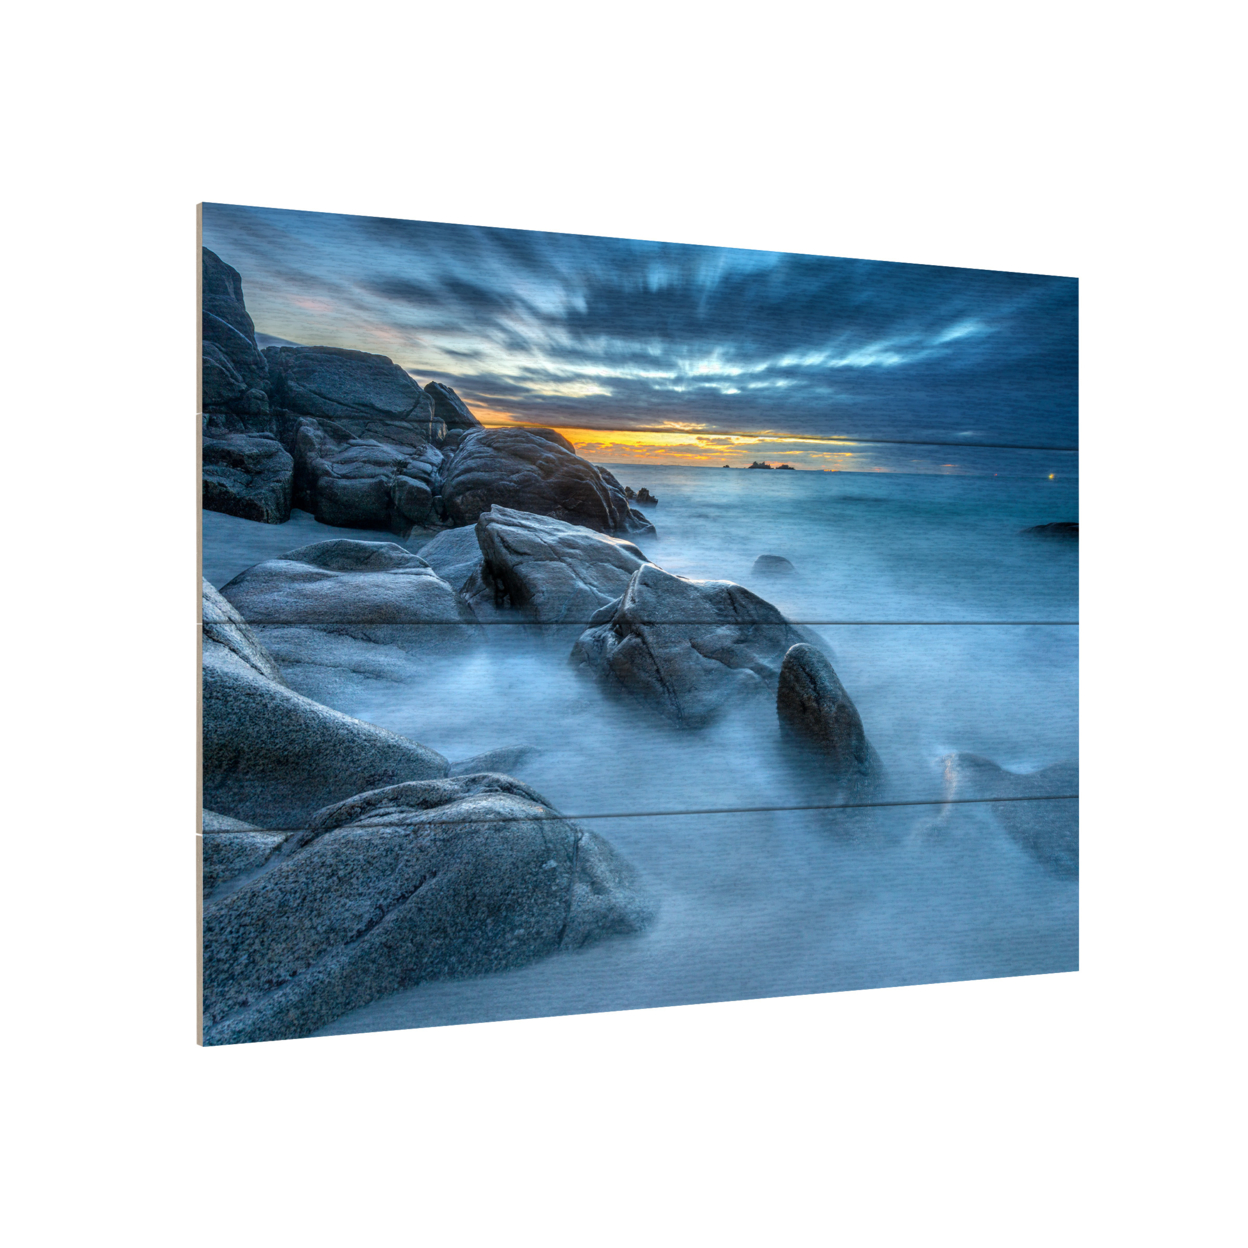 Wall Art 12 X 16 Inches Titled Blue Hour For A Blue Ocean Ready To Hang Printed On Wooden Planks